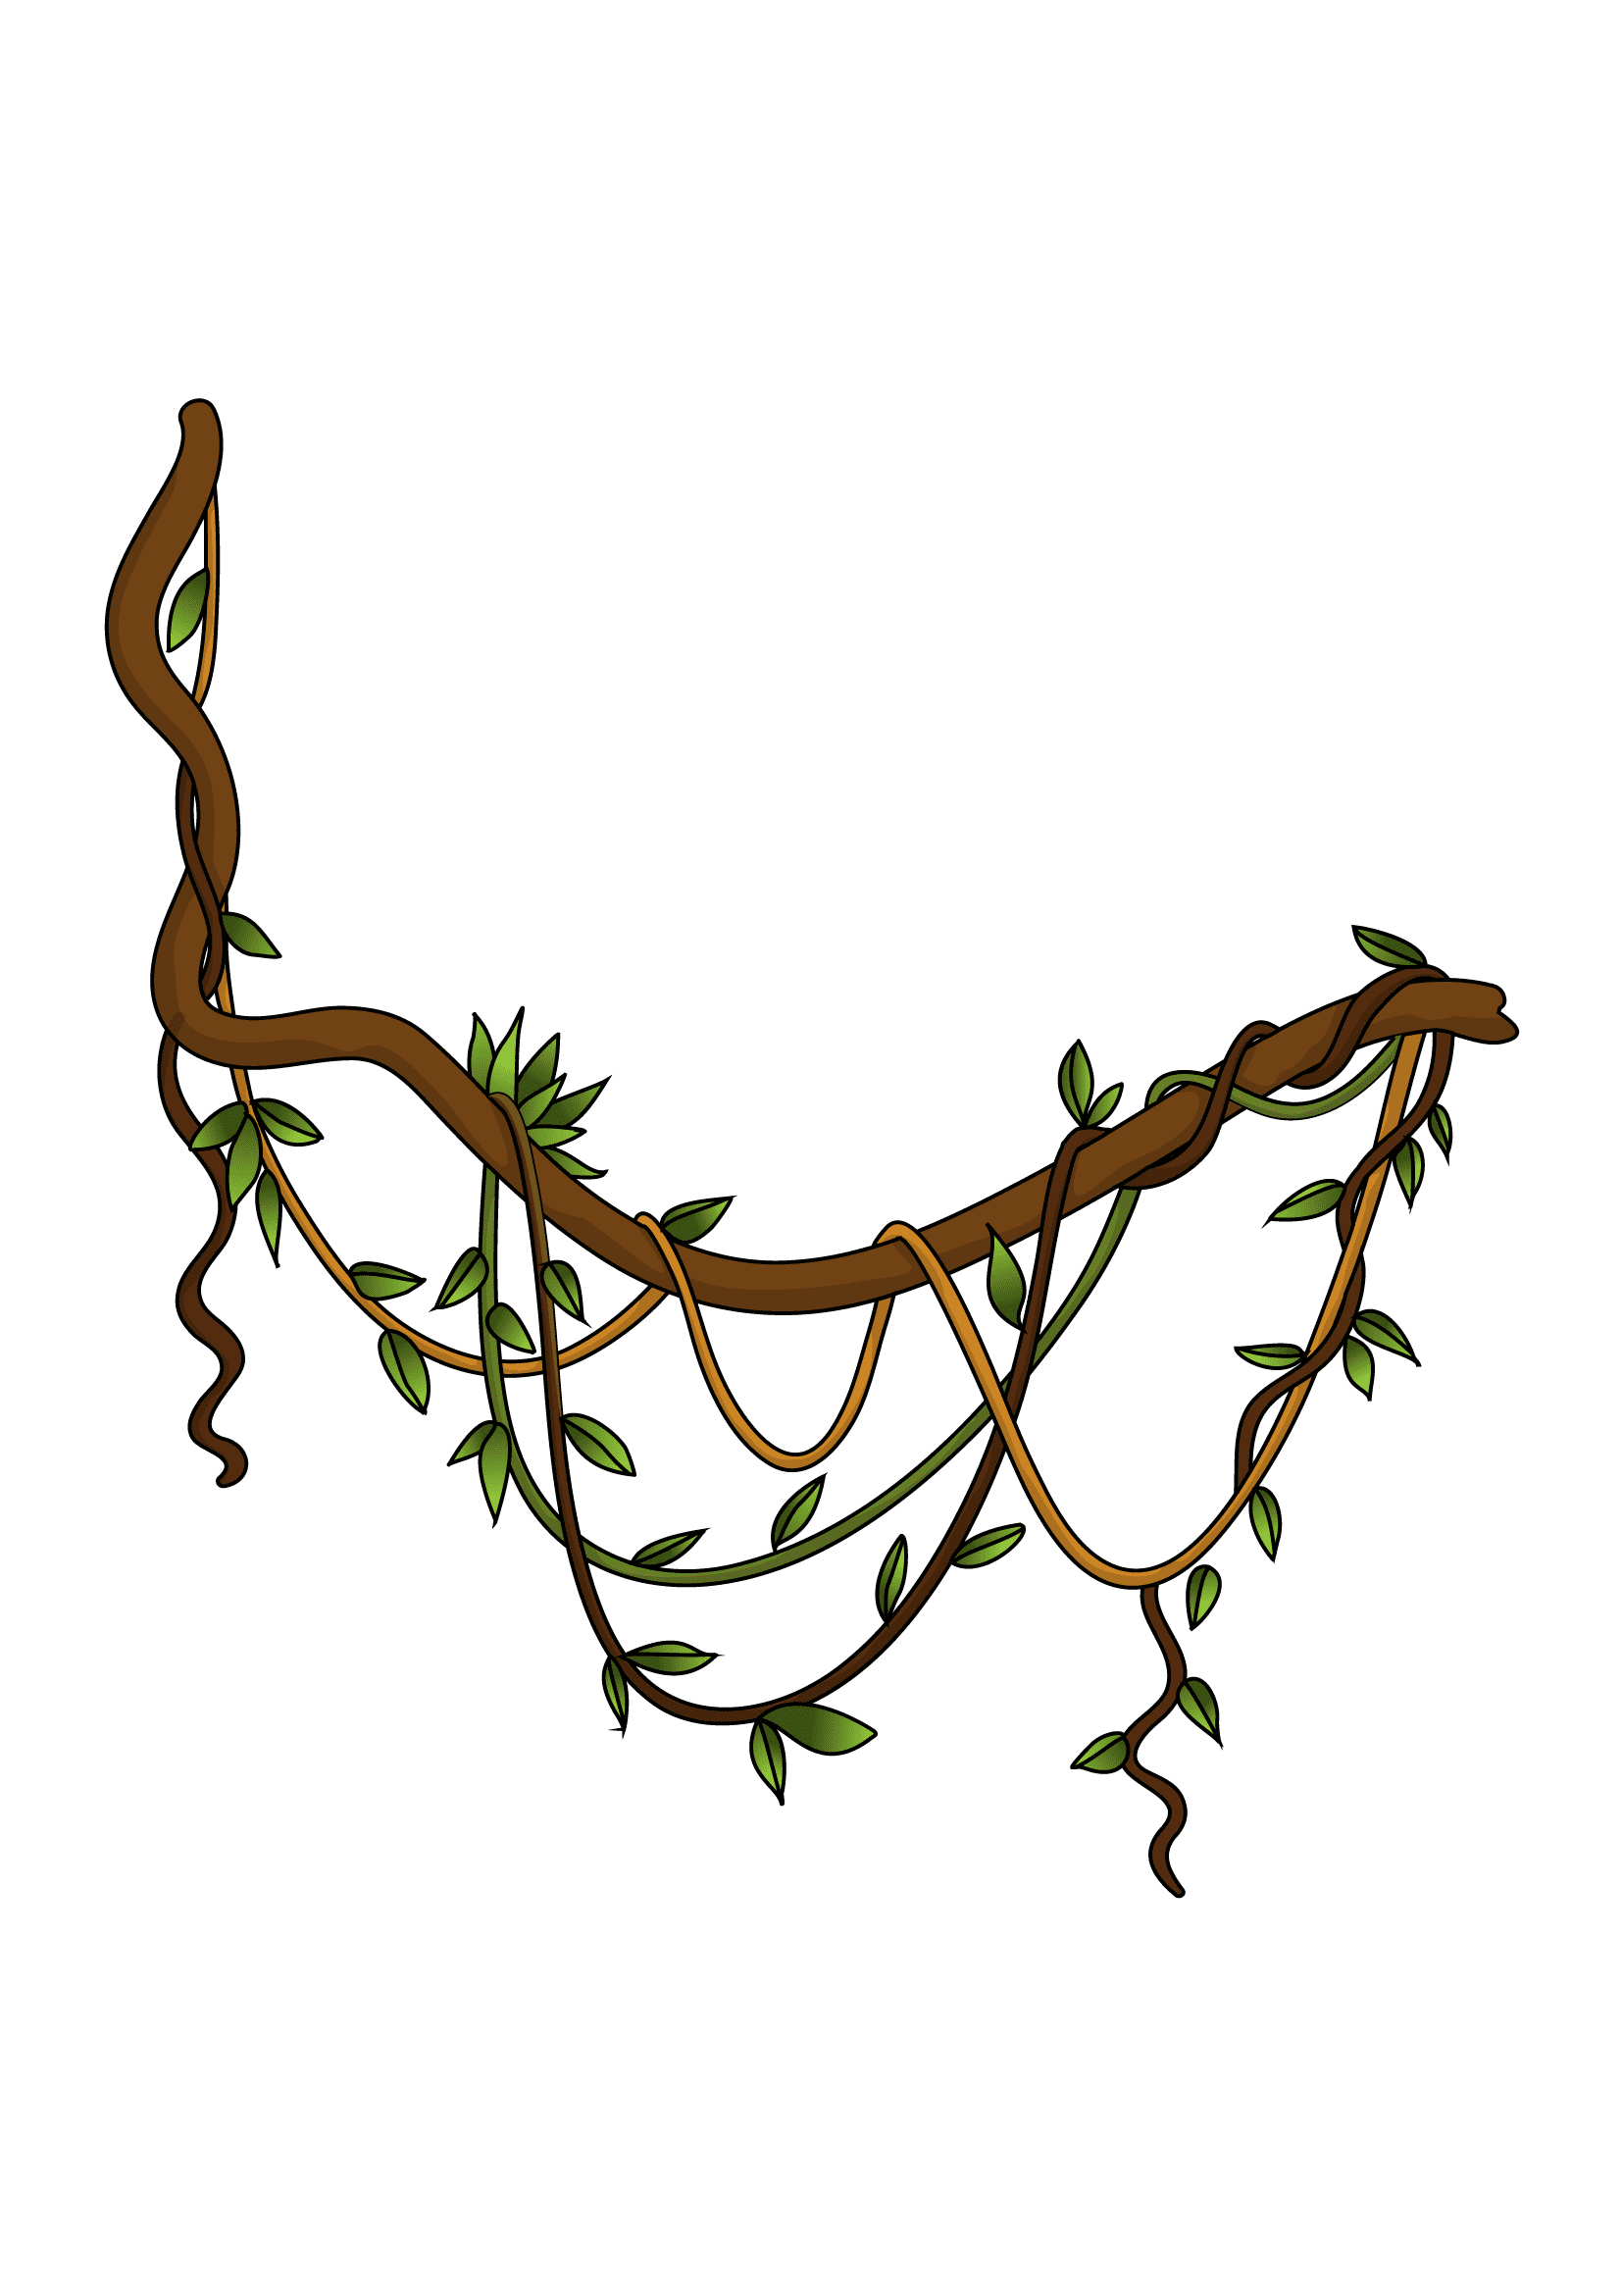 How to Draw Vines Step by Step Printable